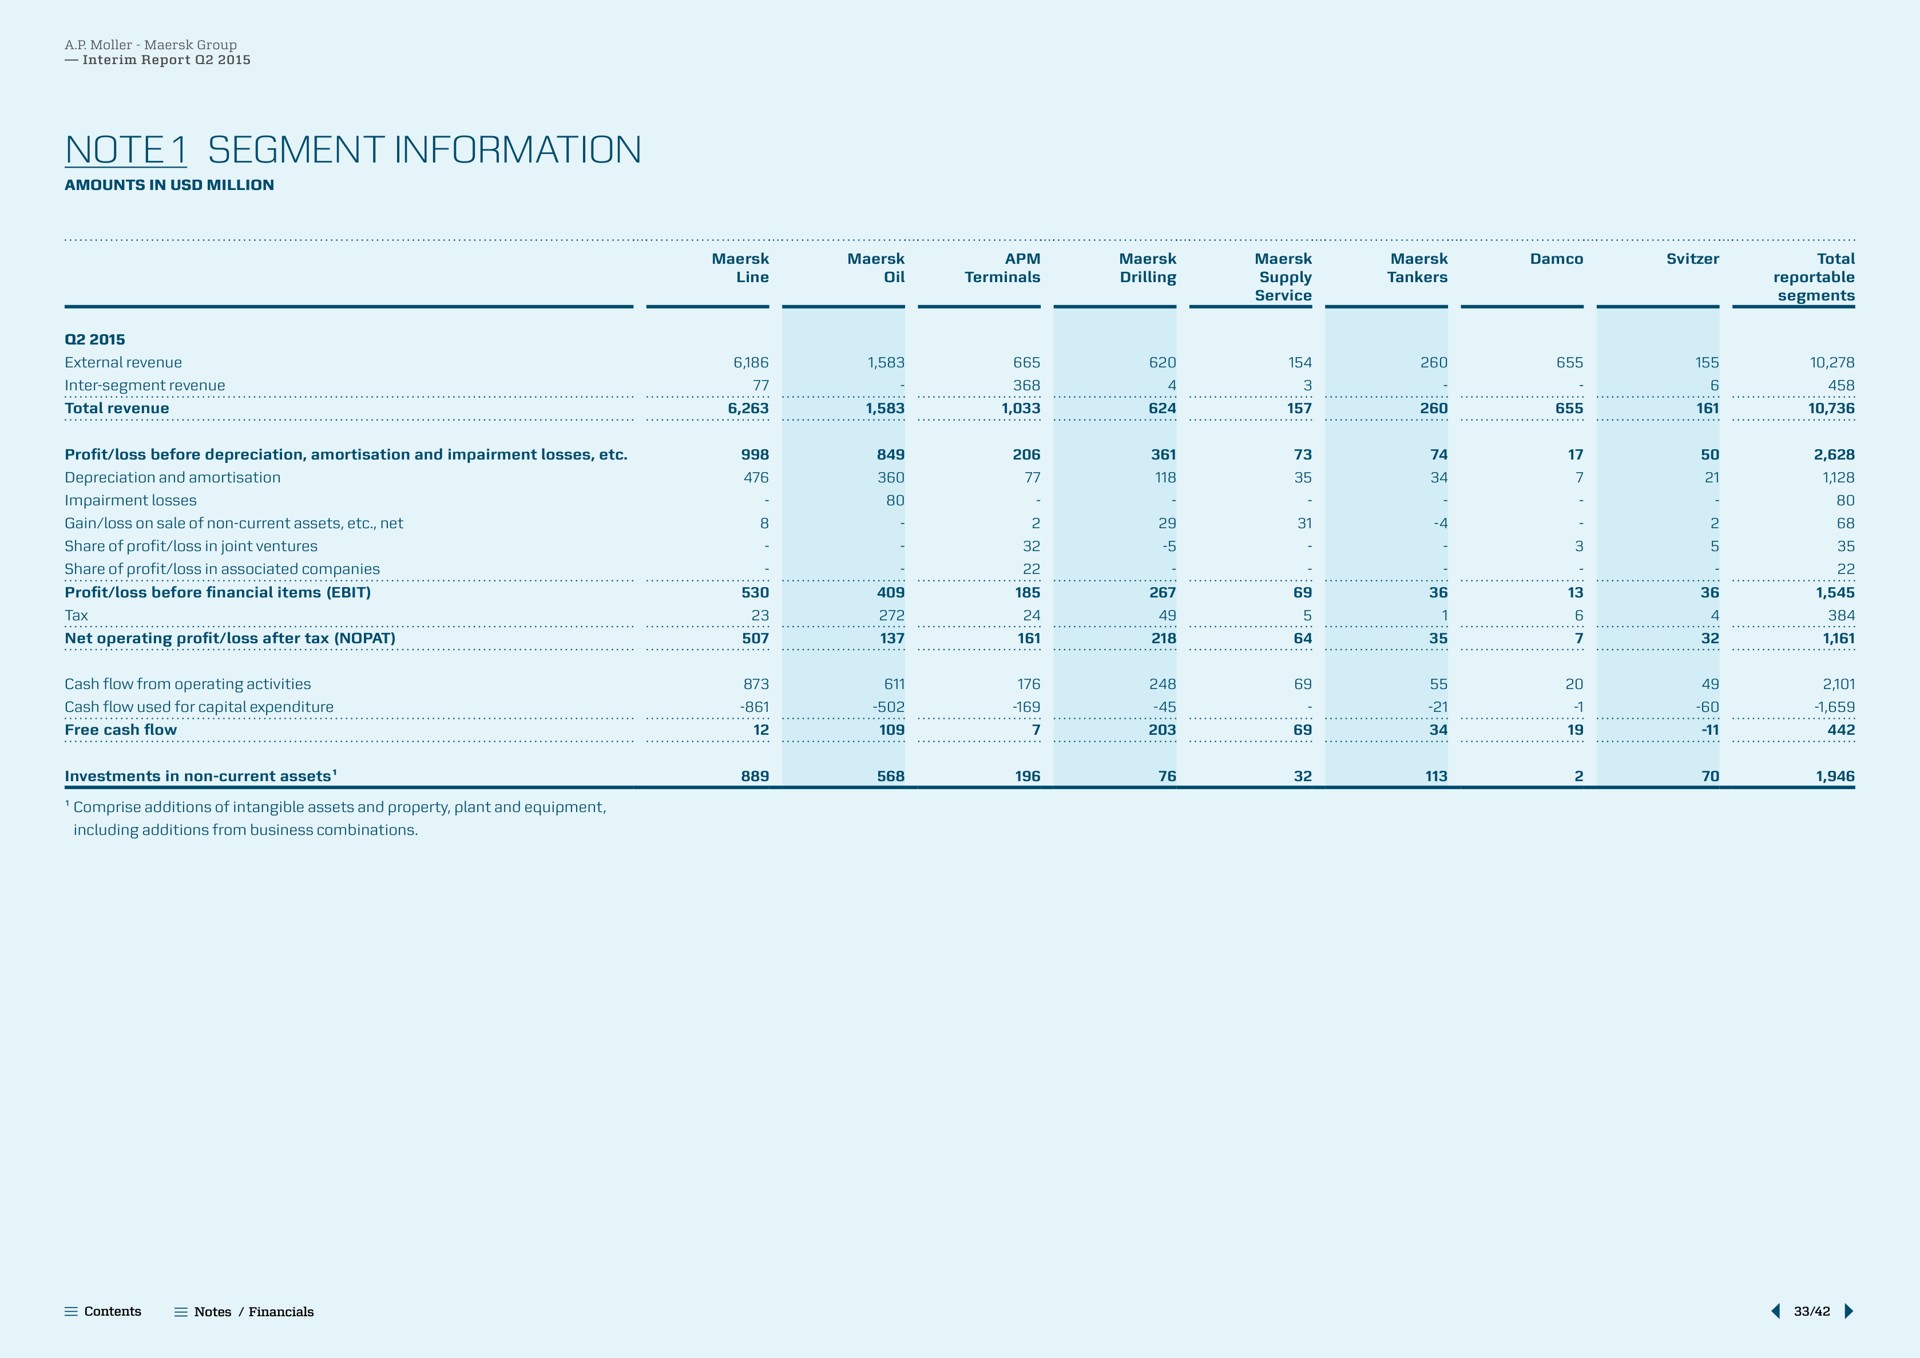 note segment information note net operating a a a investments | Maersk